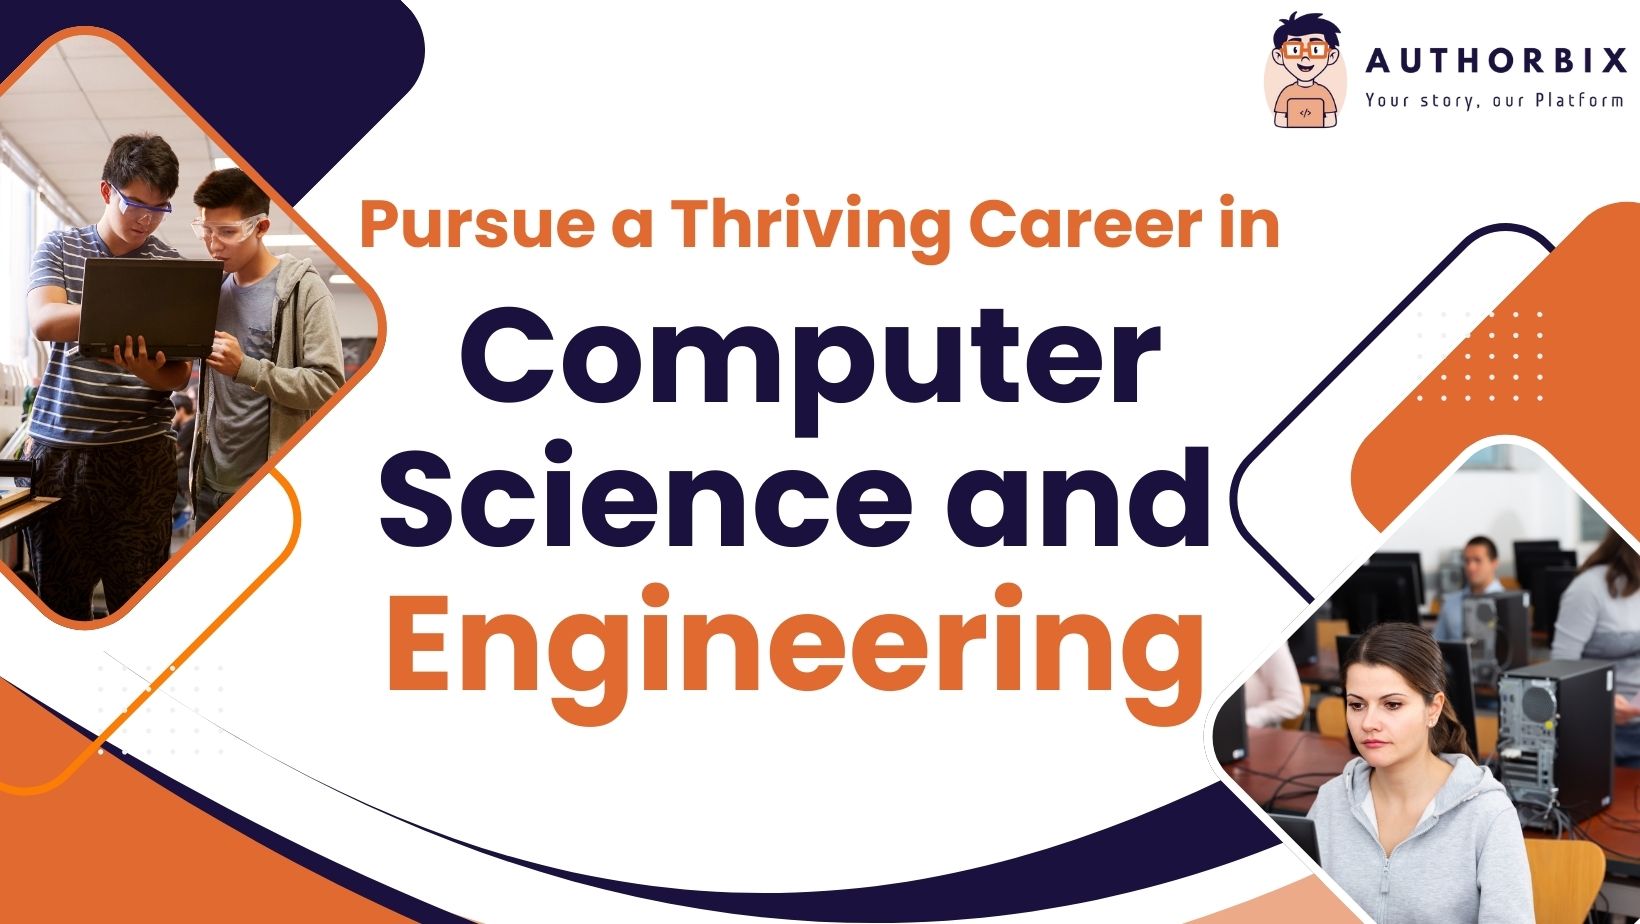 Pursue a Thriving Career in Computer Science and Engineering